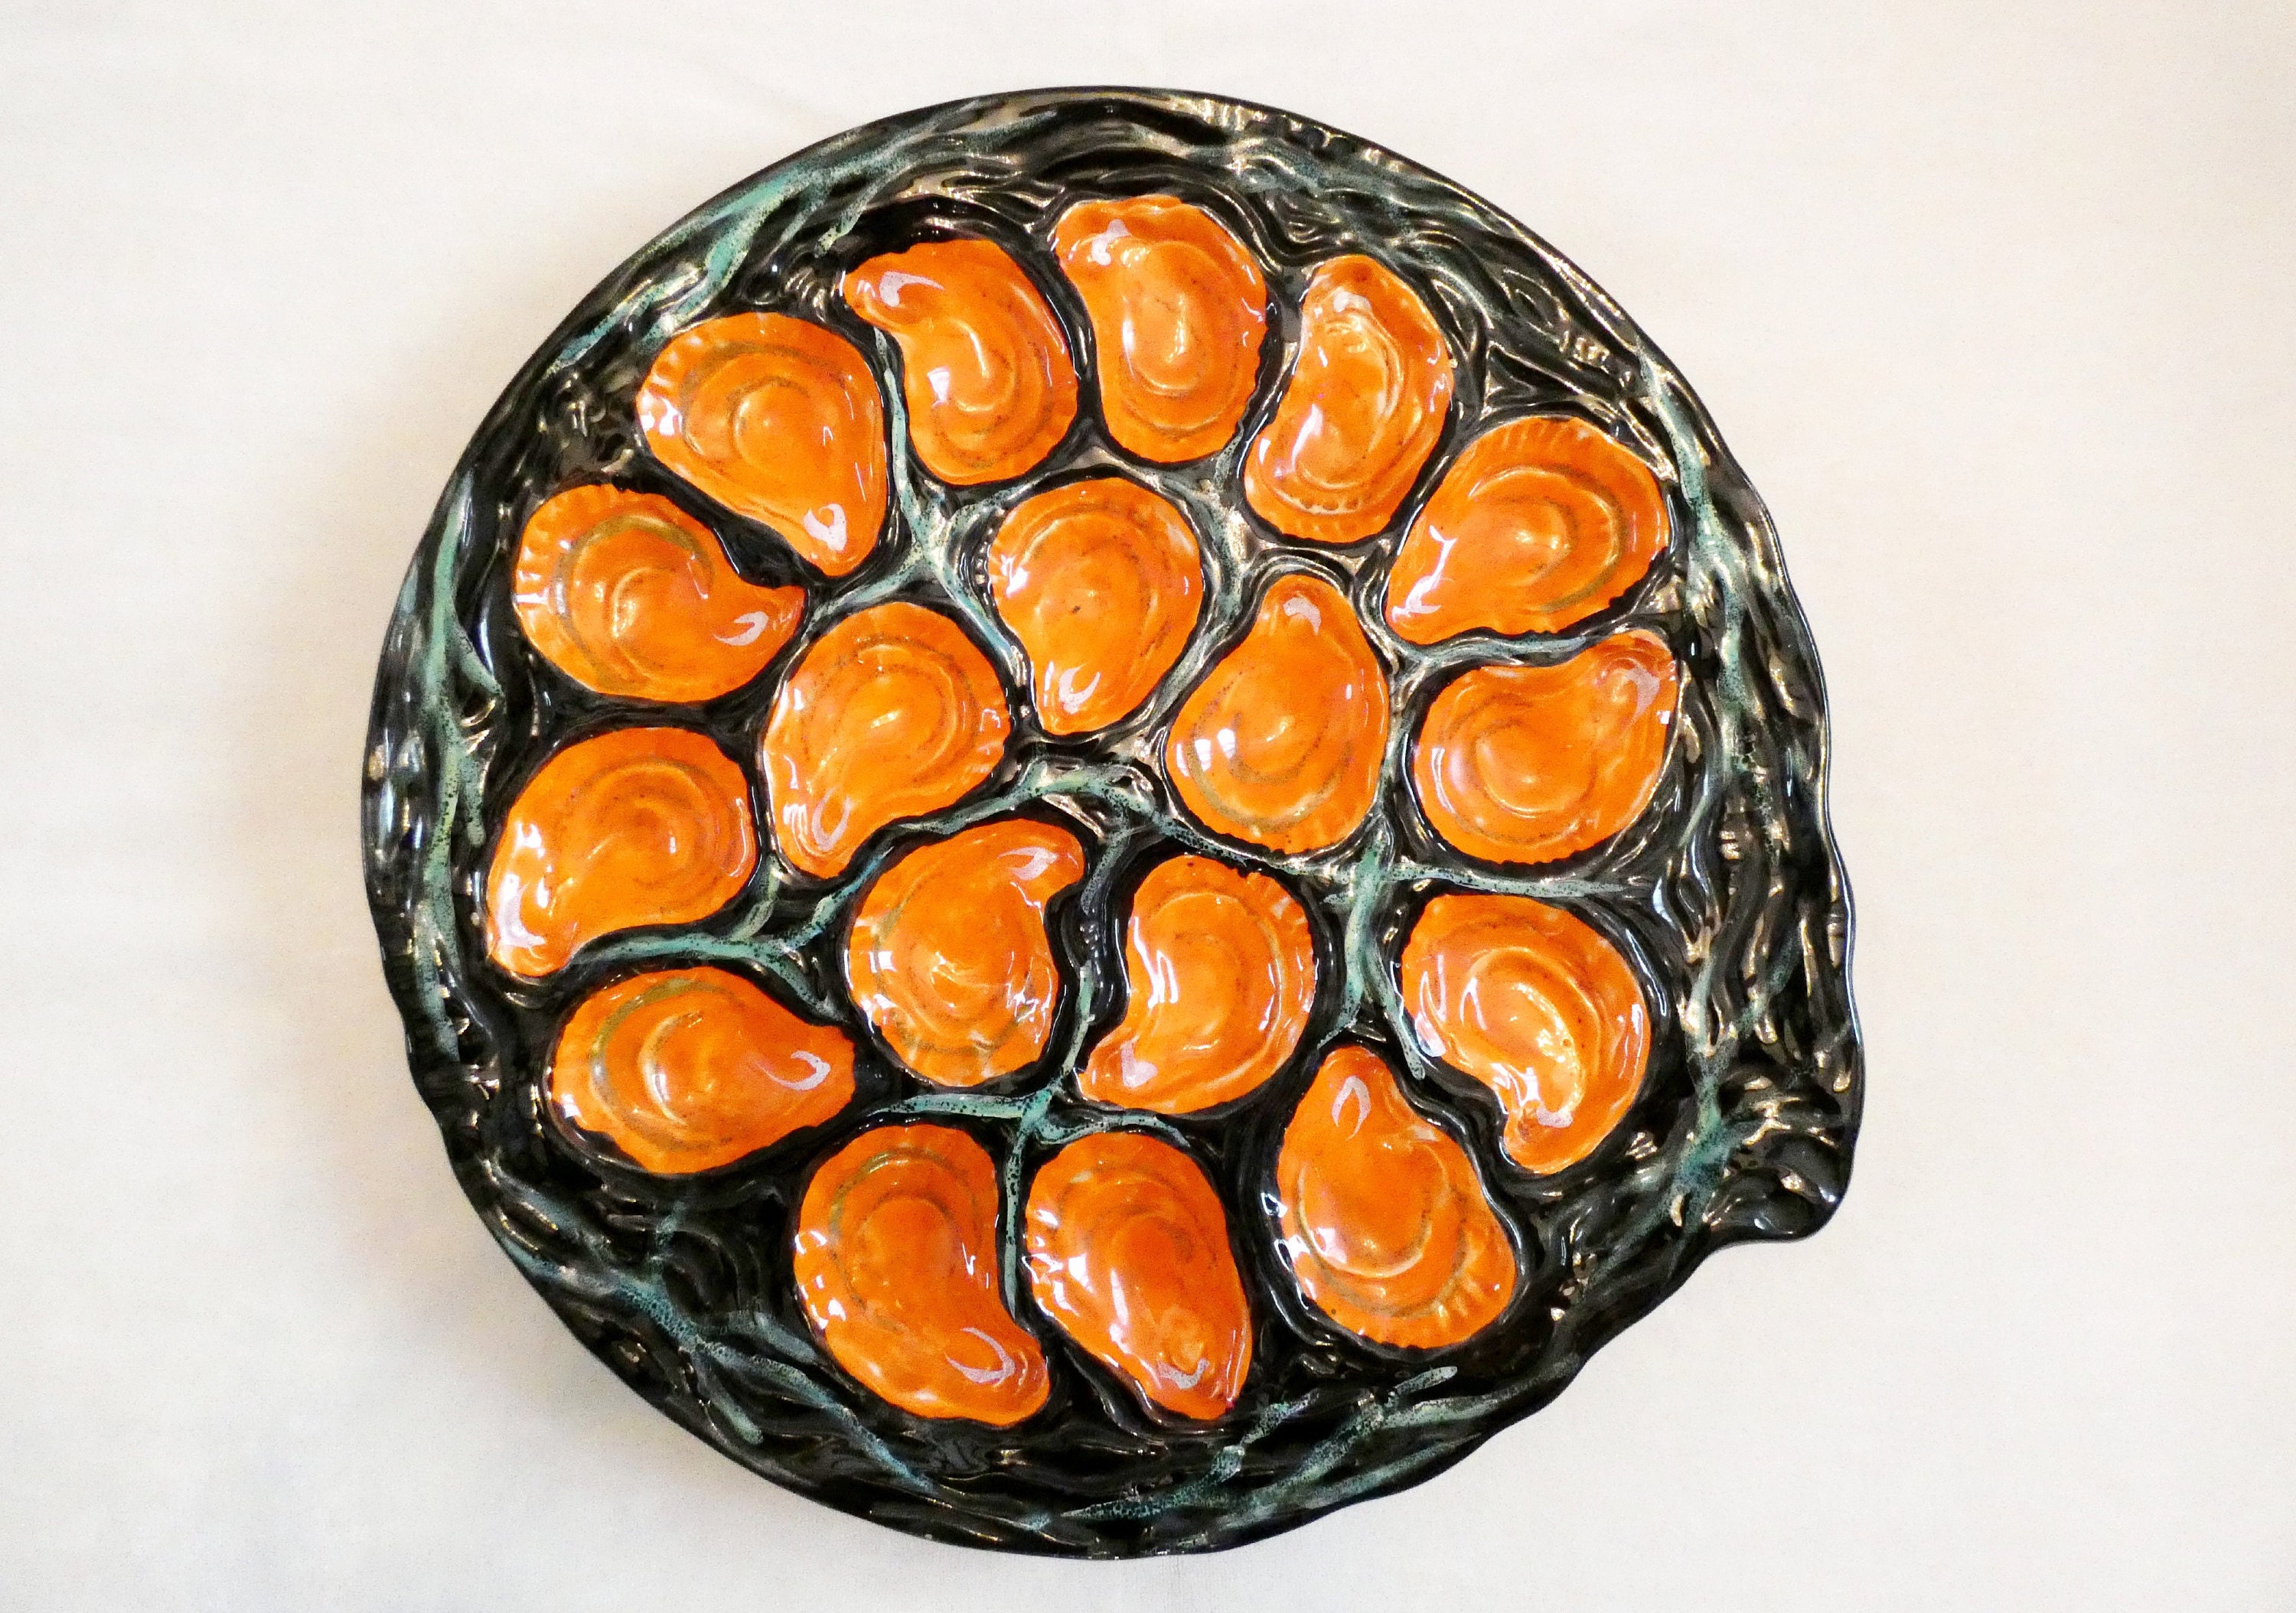 Gabriel Fourmaintraux Oyster Plate, Vintage French Pottery Platter By Fourmaintraux, Majolica Seafood 1950's